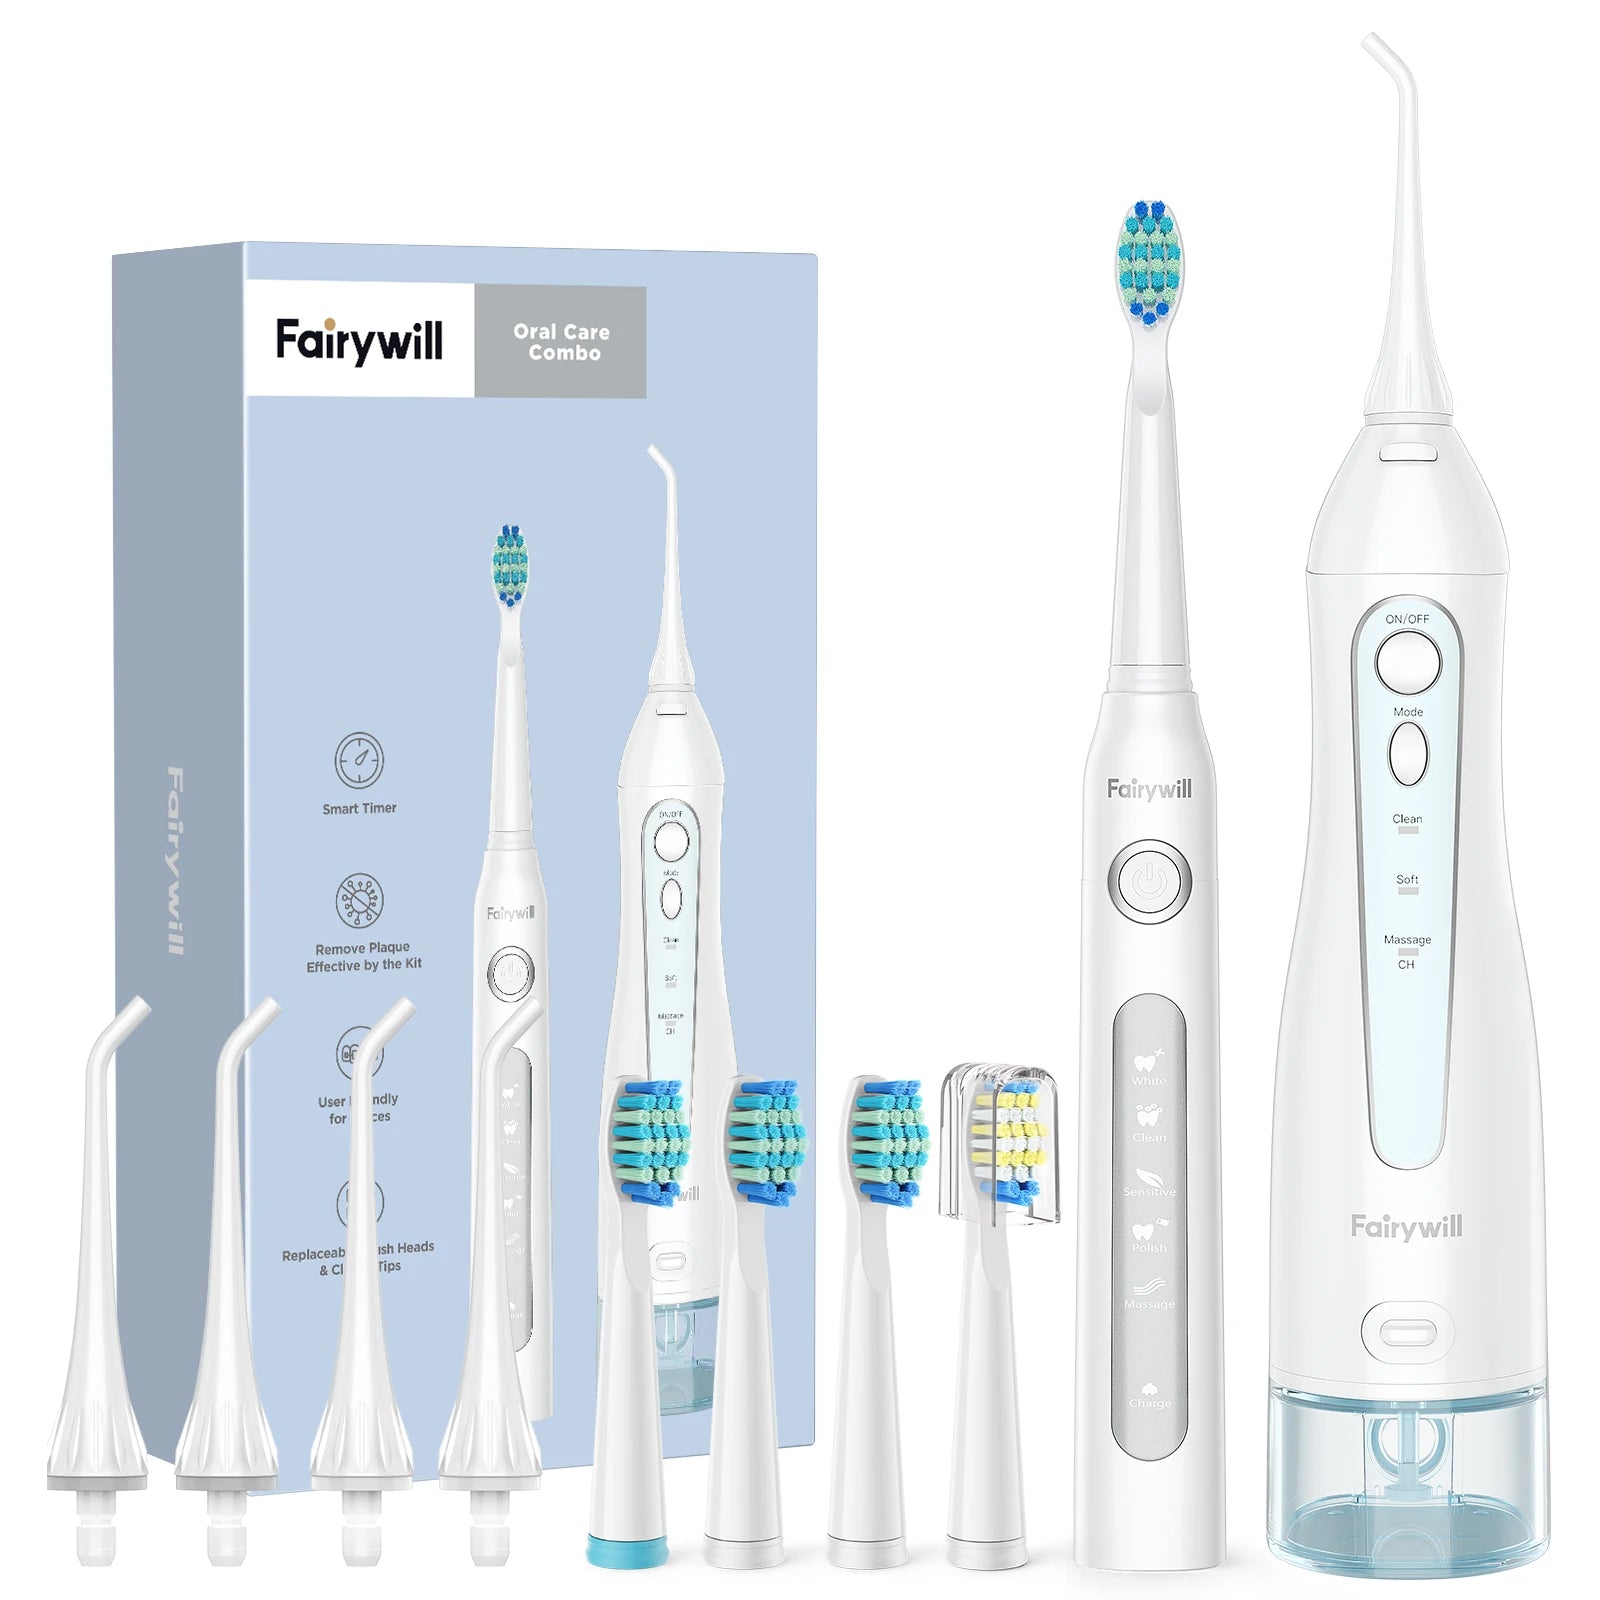 Fairywill Water Dental Flosser Teeth Portable Cordless USB Oral Irrigator Cleaner IPX7 Waterproof Electric Toothbrush Set Home 5020E-507White - IHavePaws